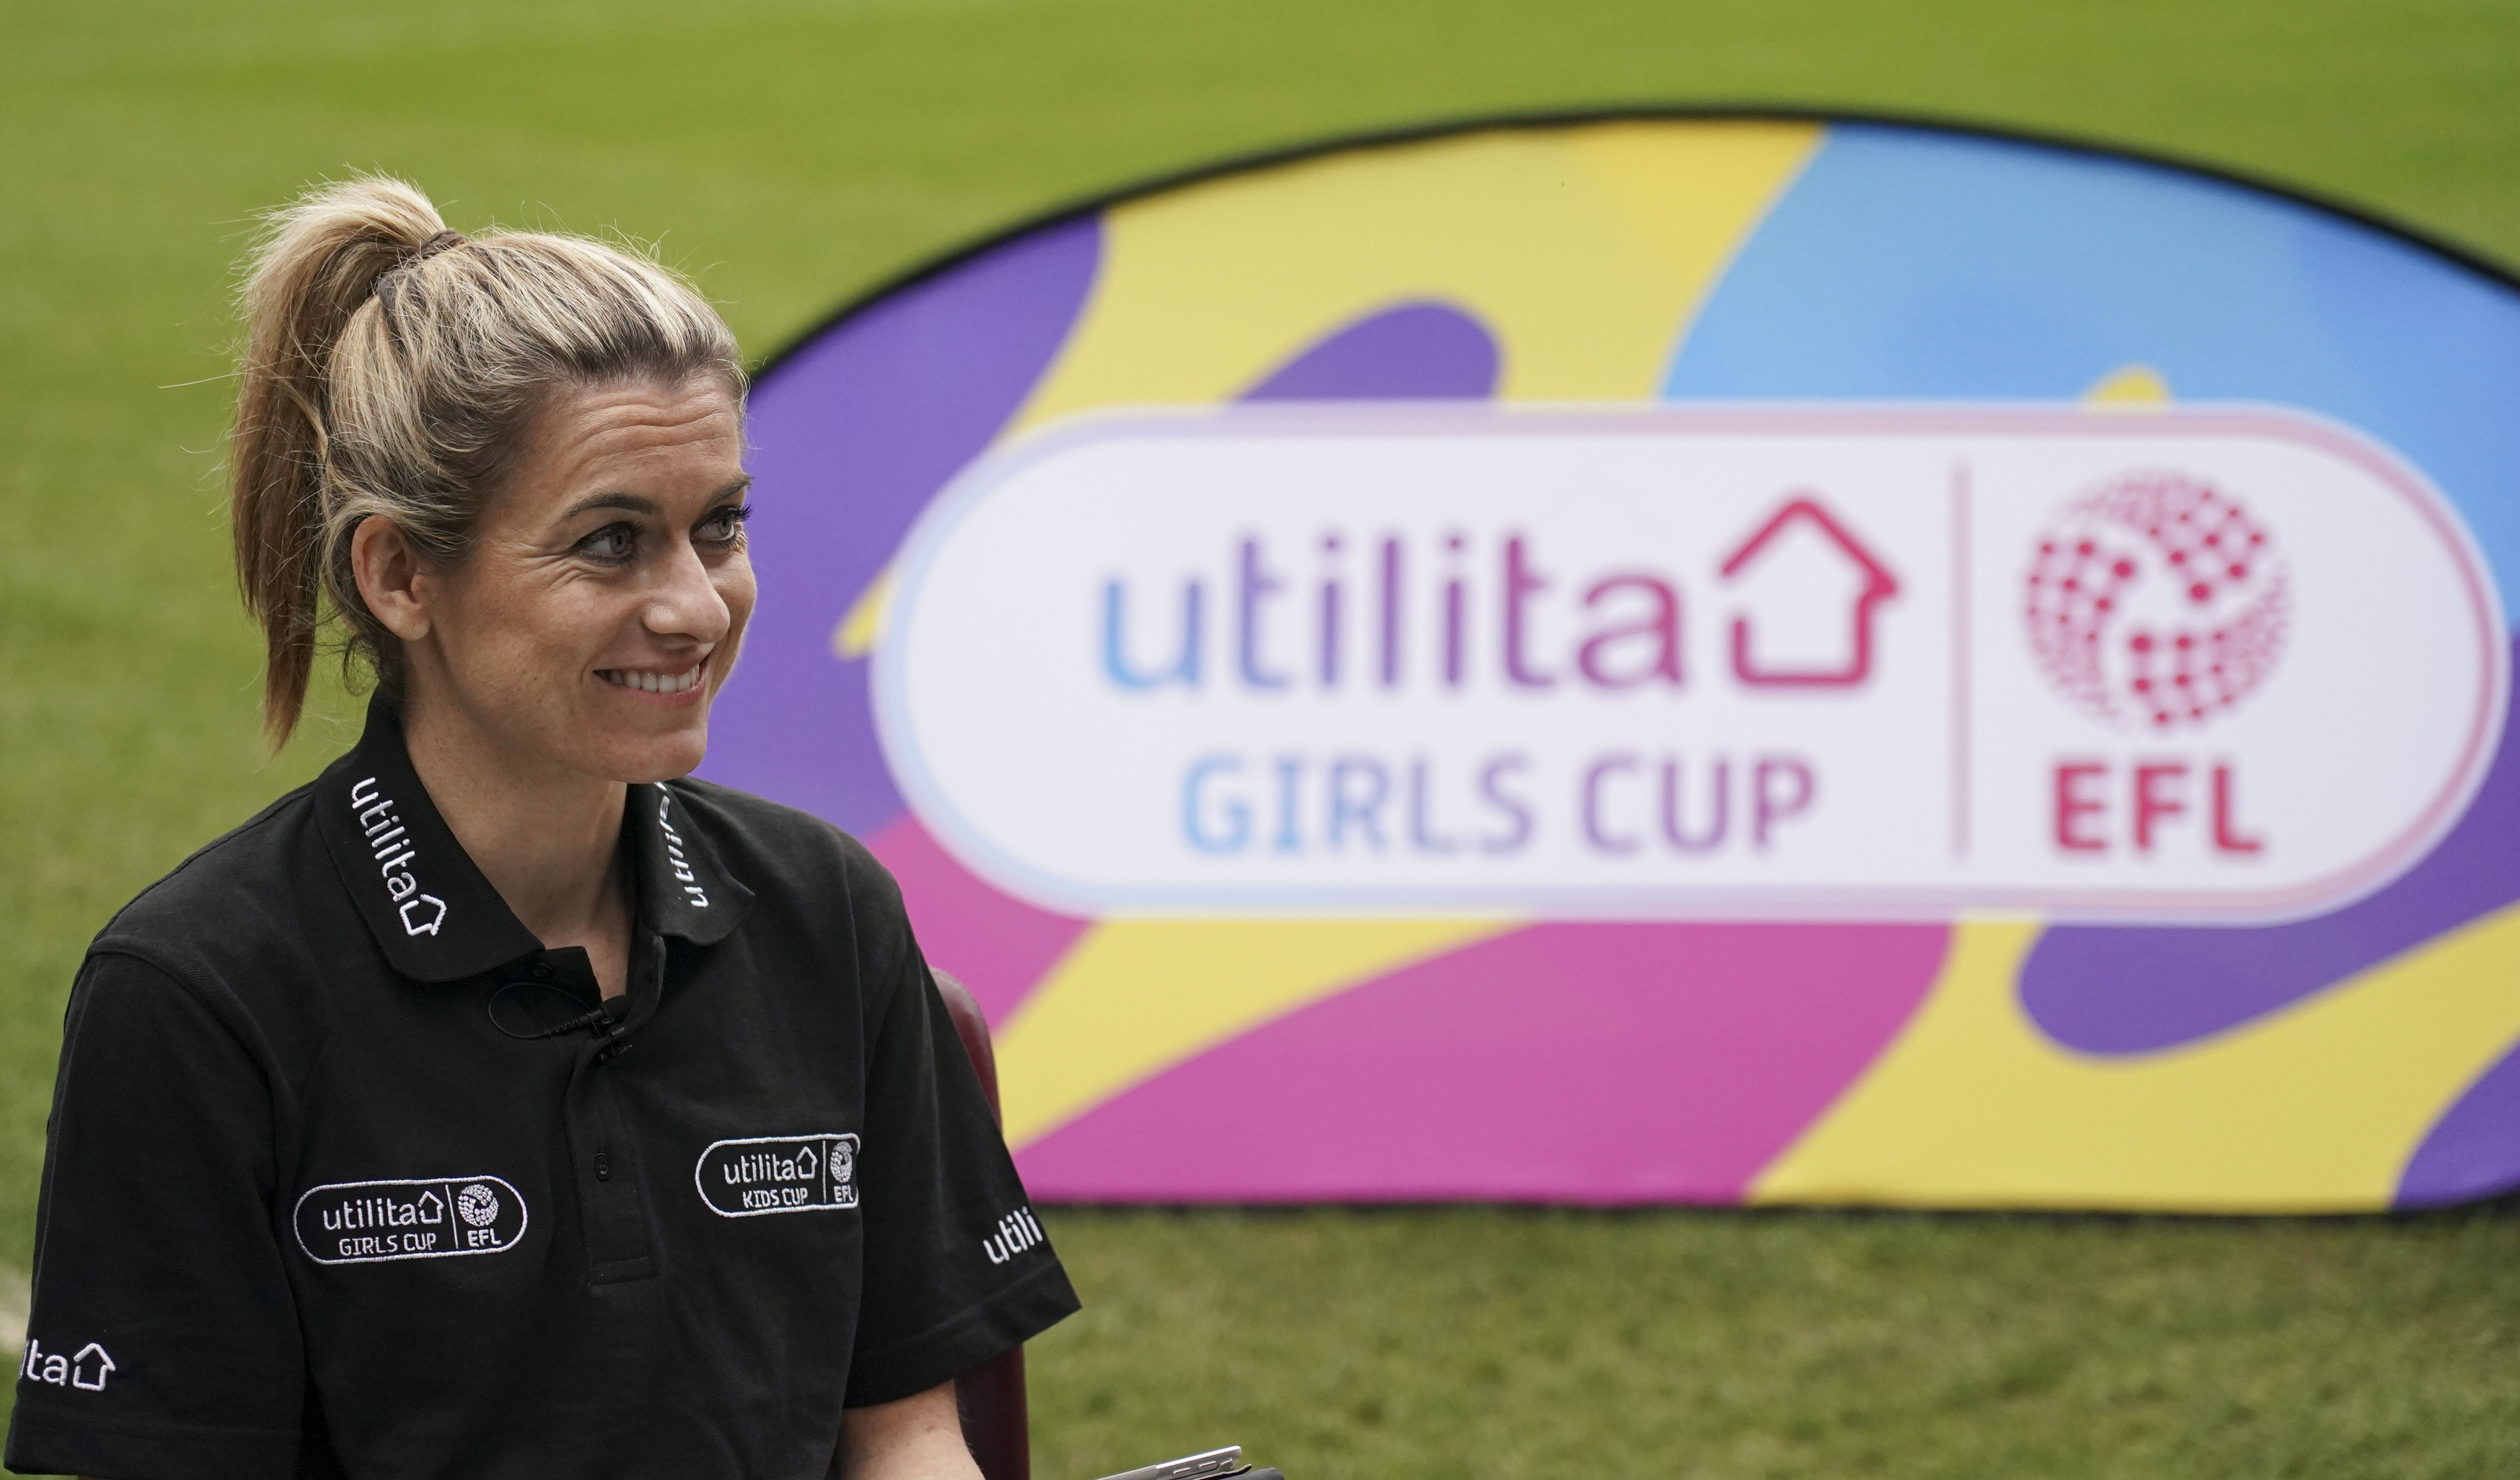 Former England international Karen Carney helped to launch the Utilita Kids and Girls Cup with the children from Ealdham Primary School last week. 